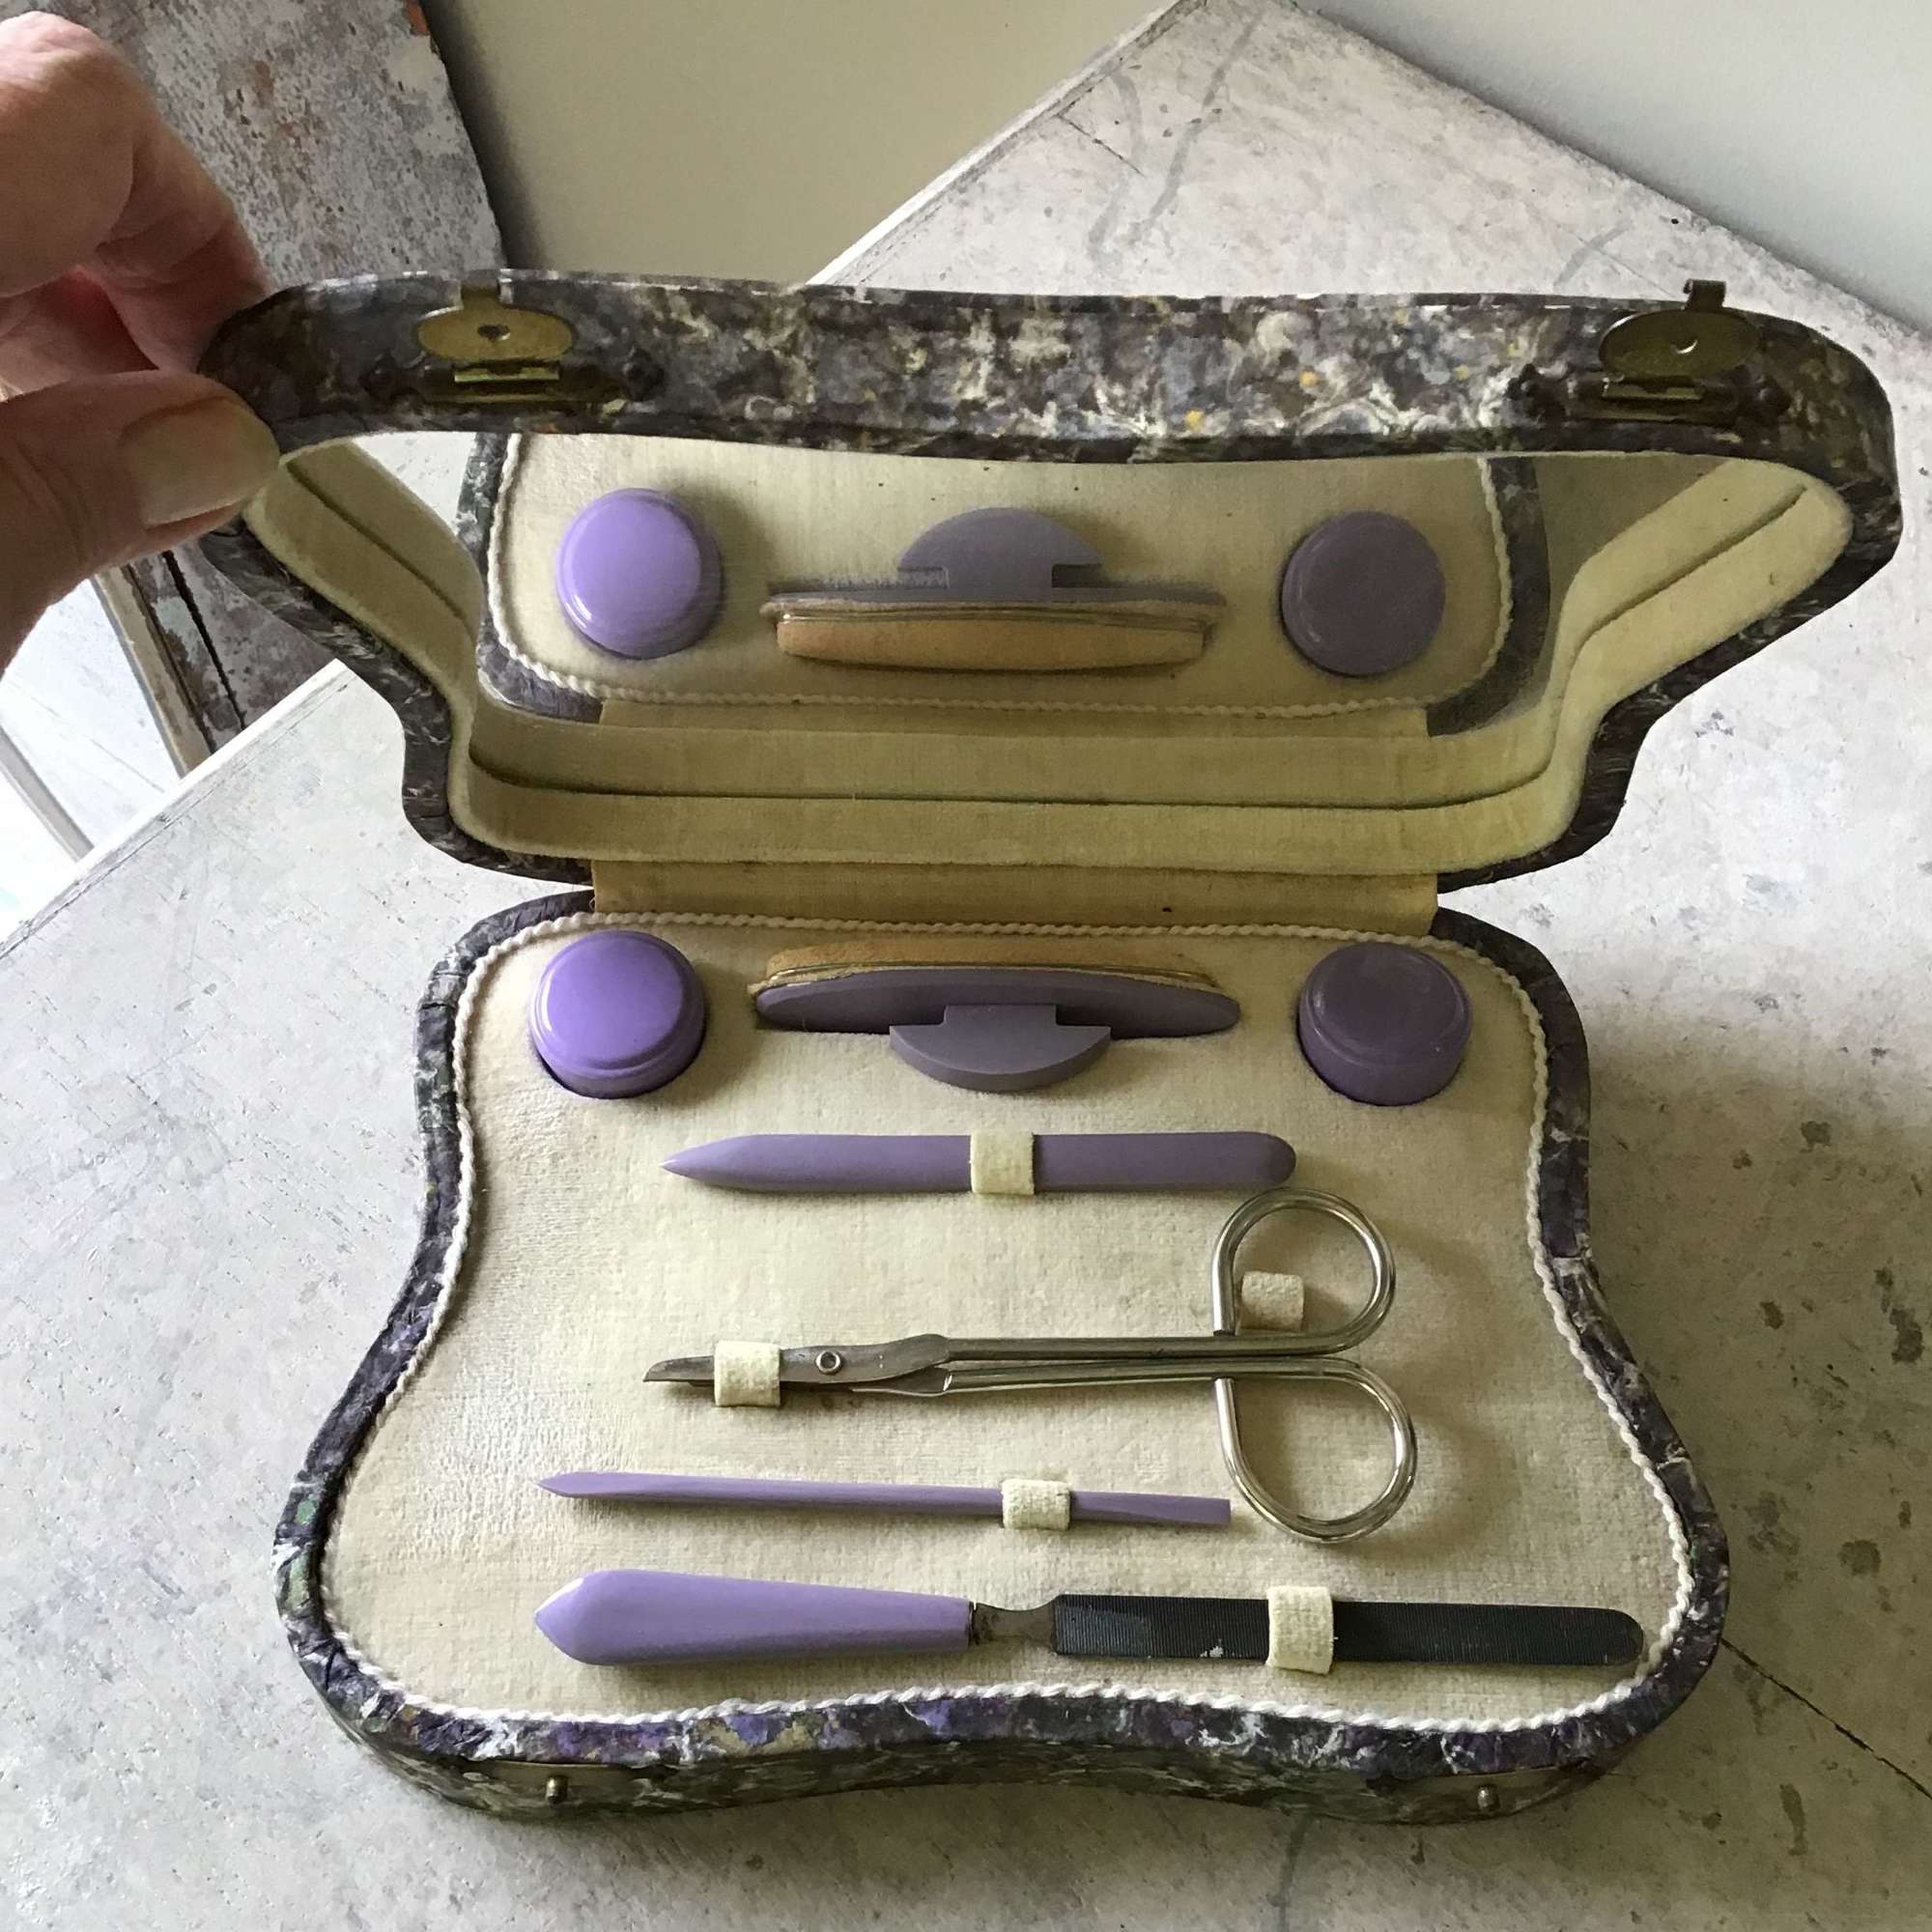 Early lilac manicure set in its original marbled paper box